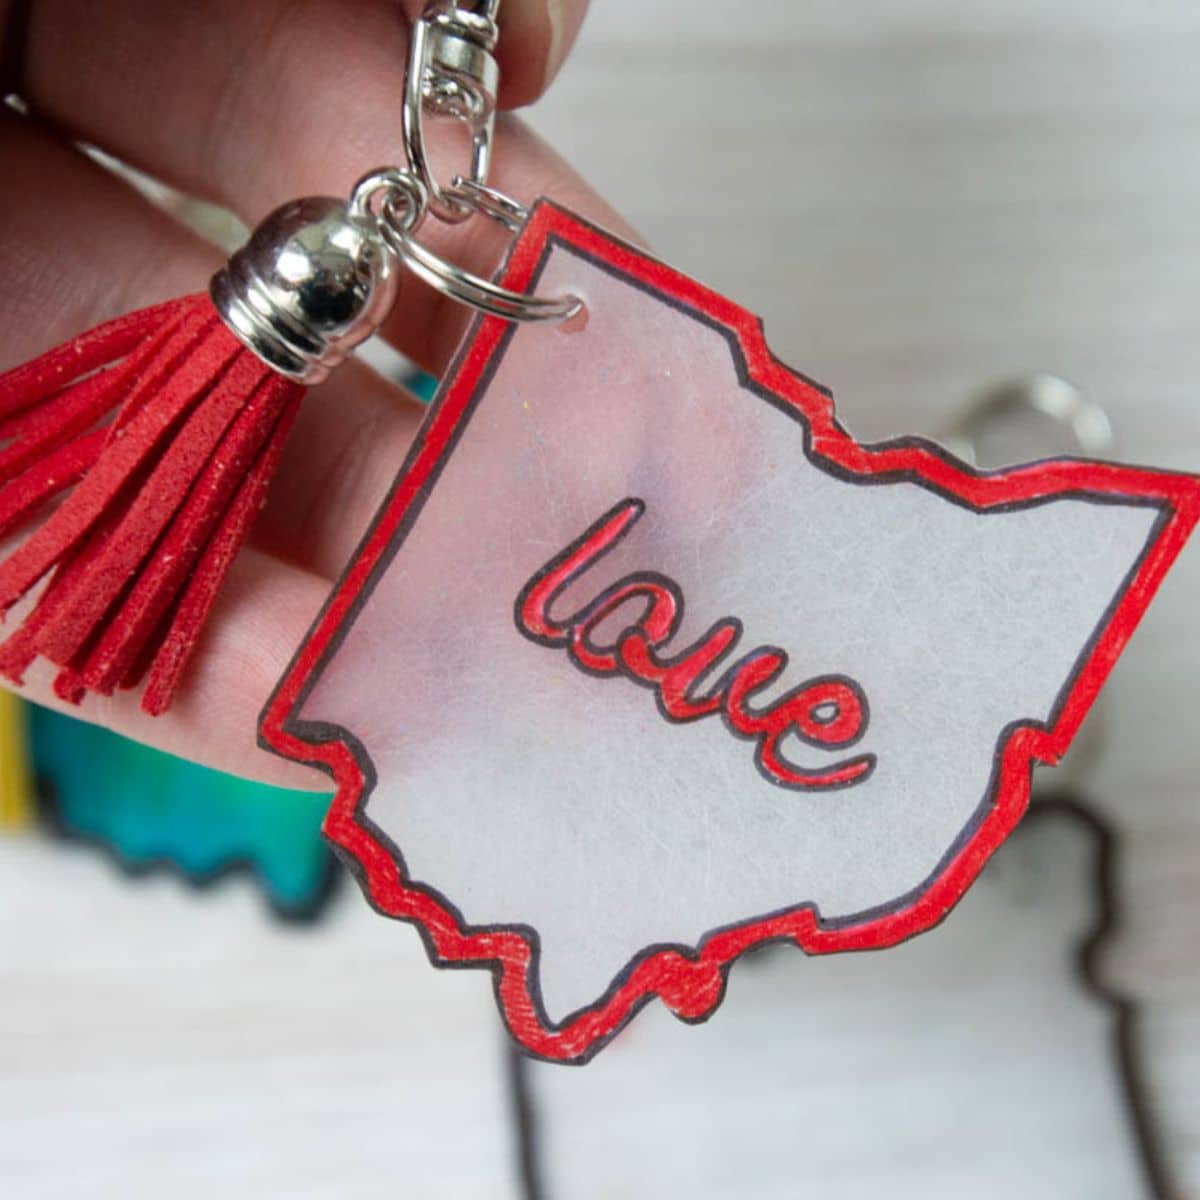 hand holding an Ohio state keychain with red tassel.